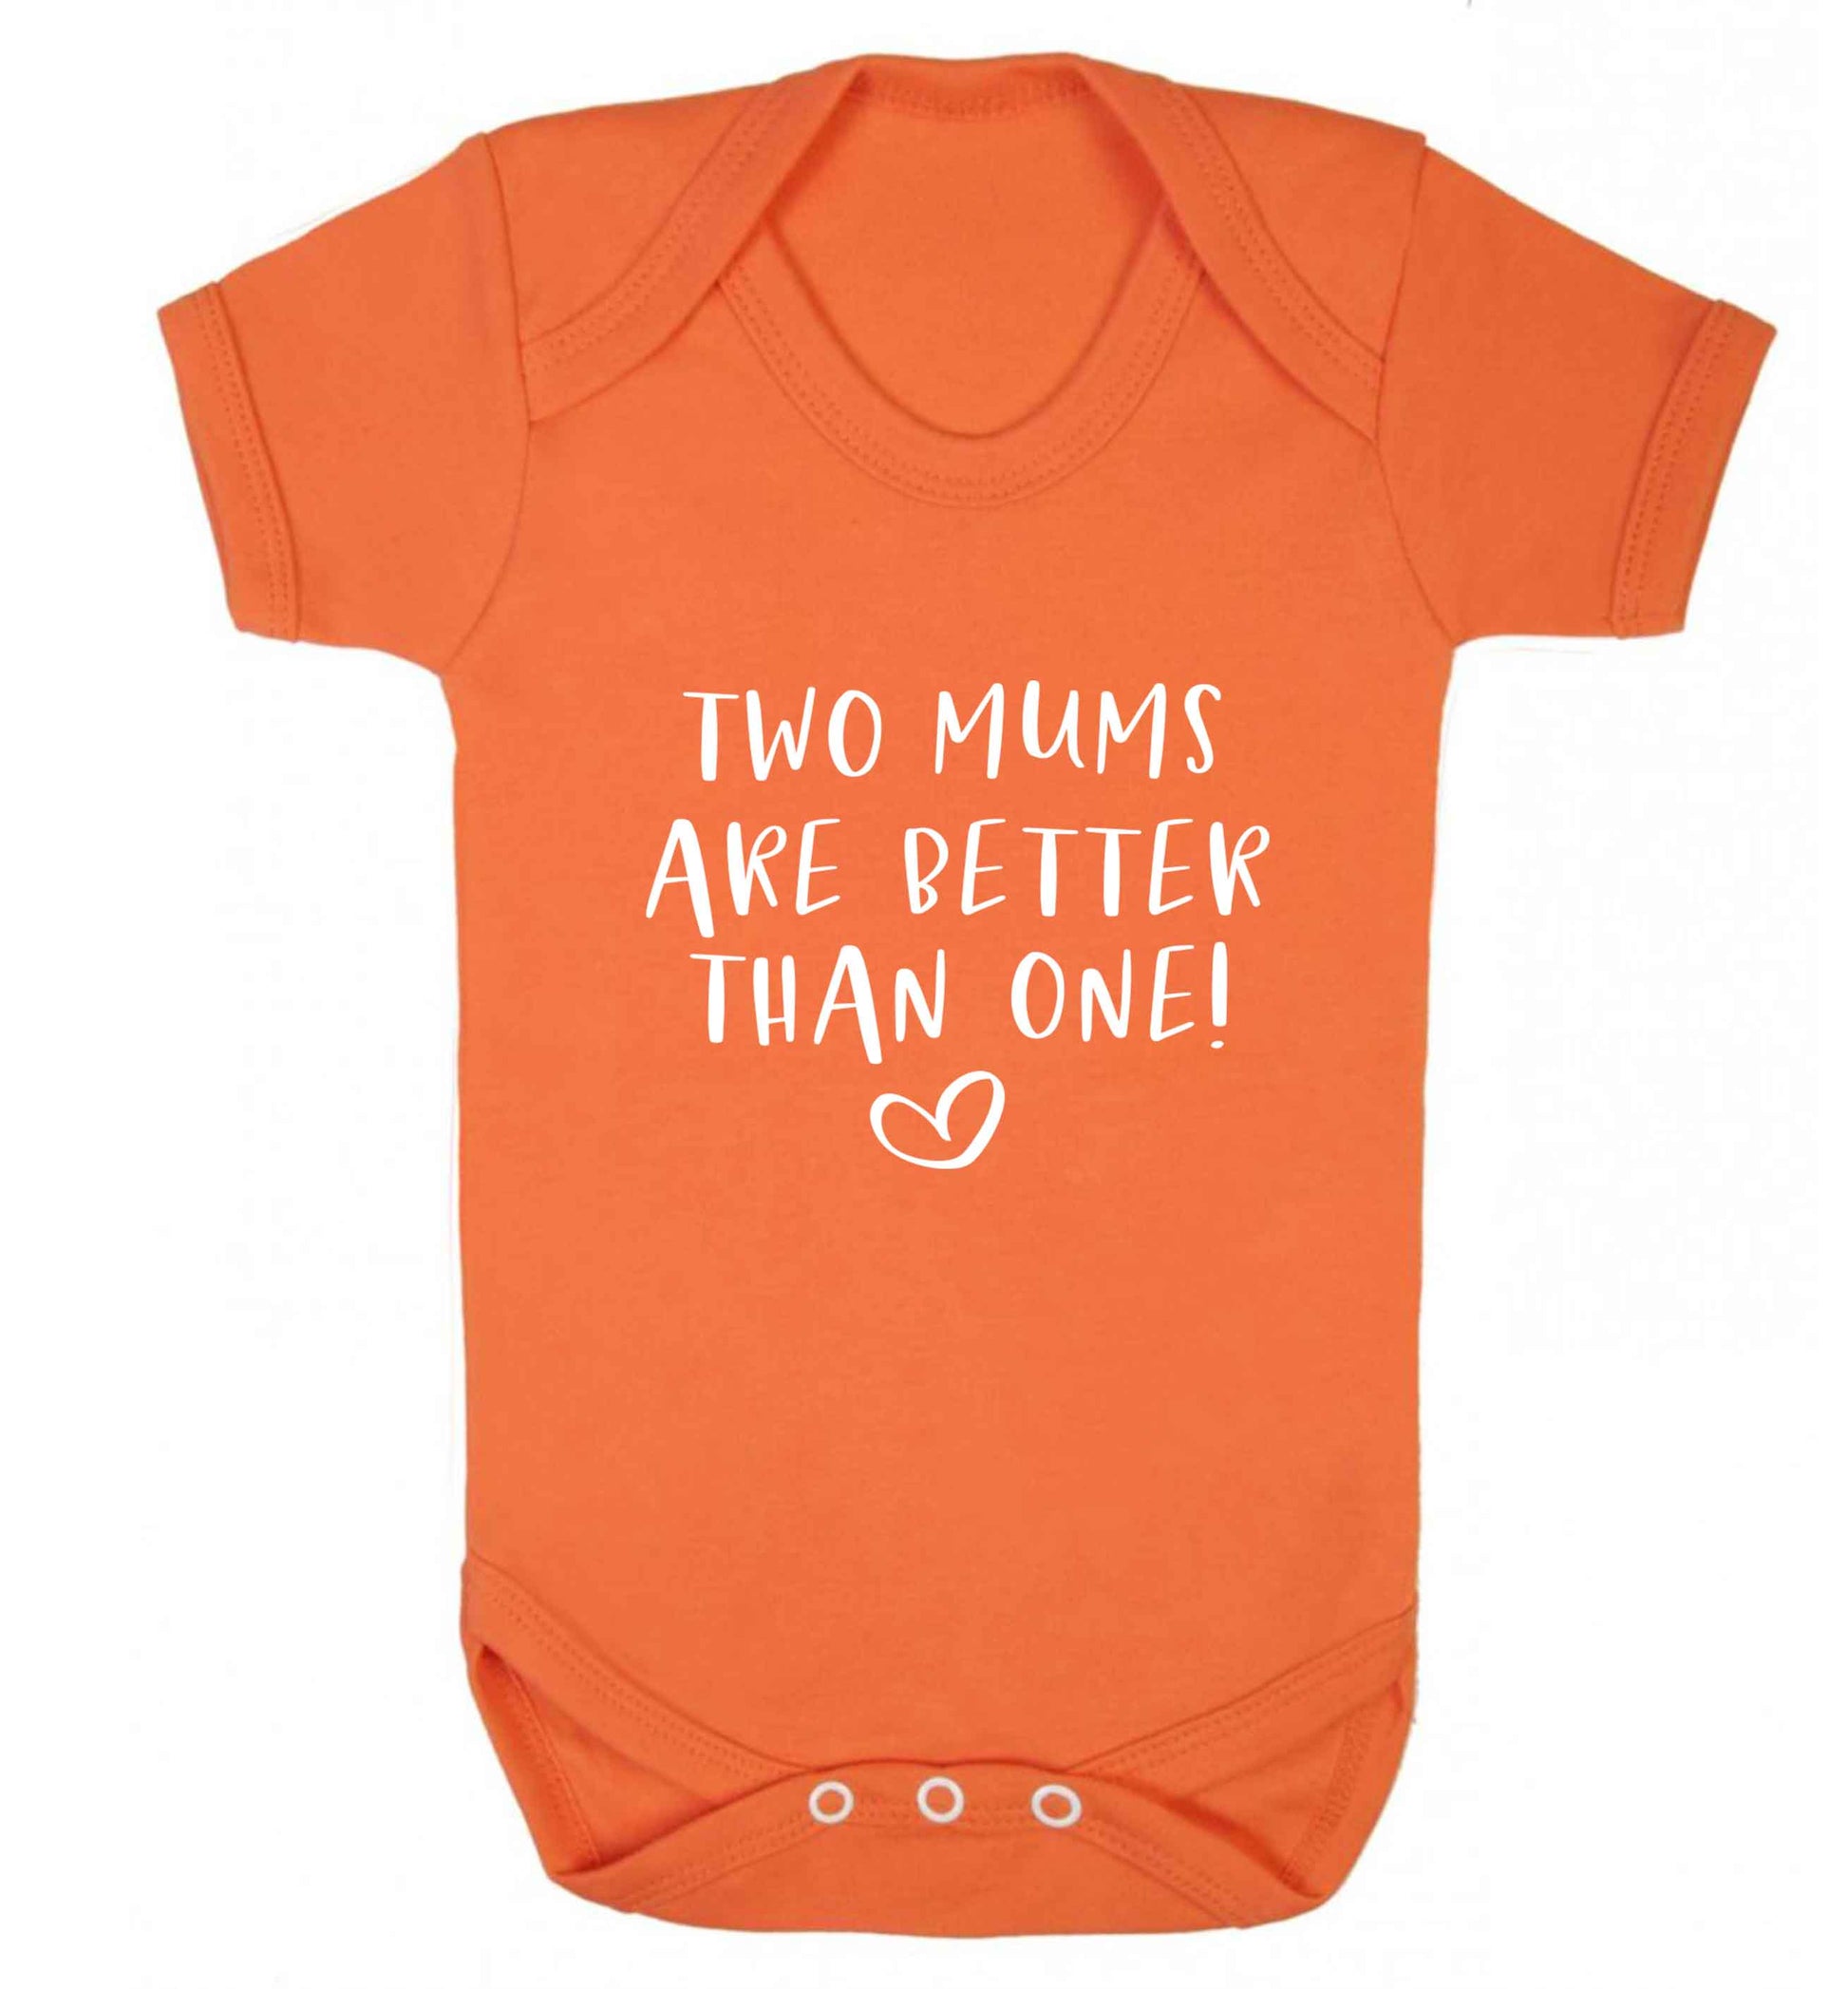 Two mums are better than one baby vest orange 18-24 months